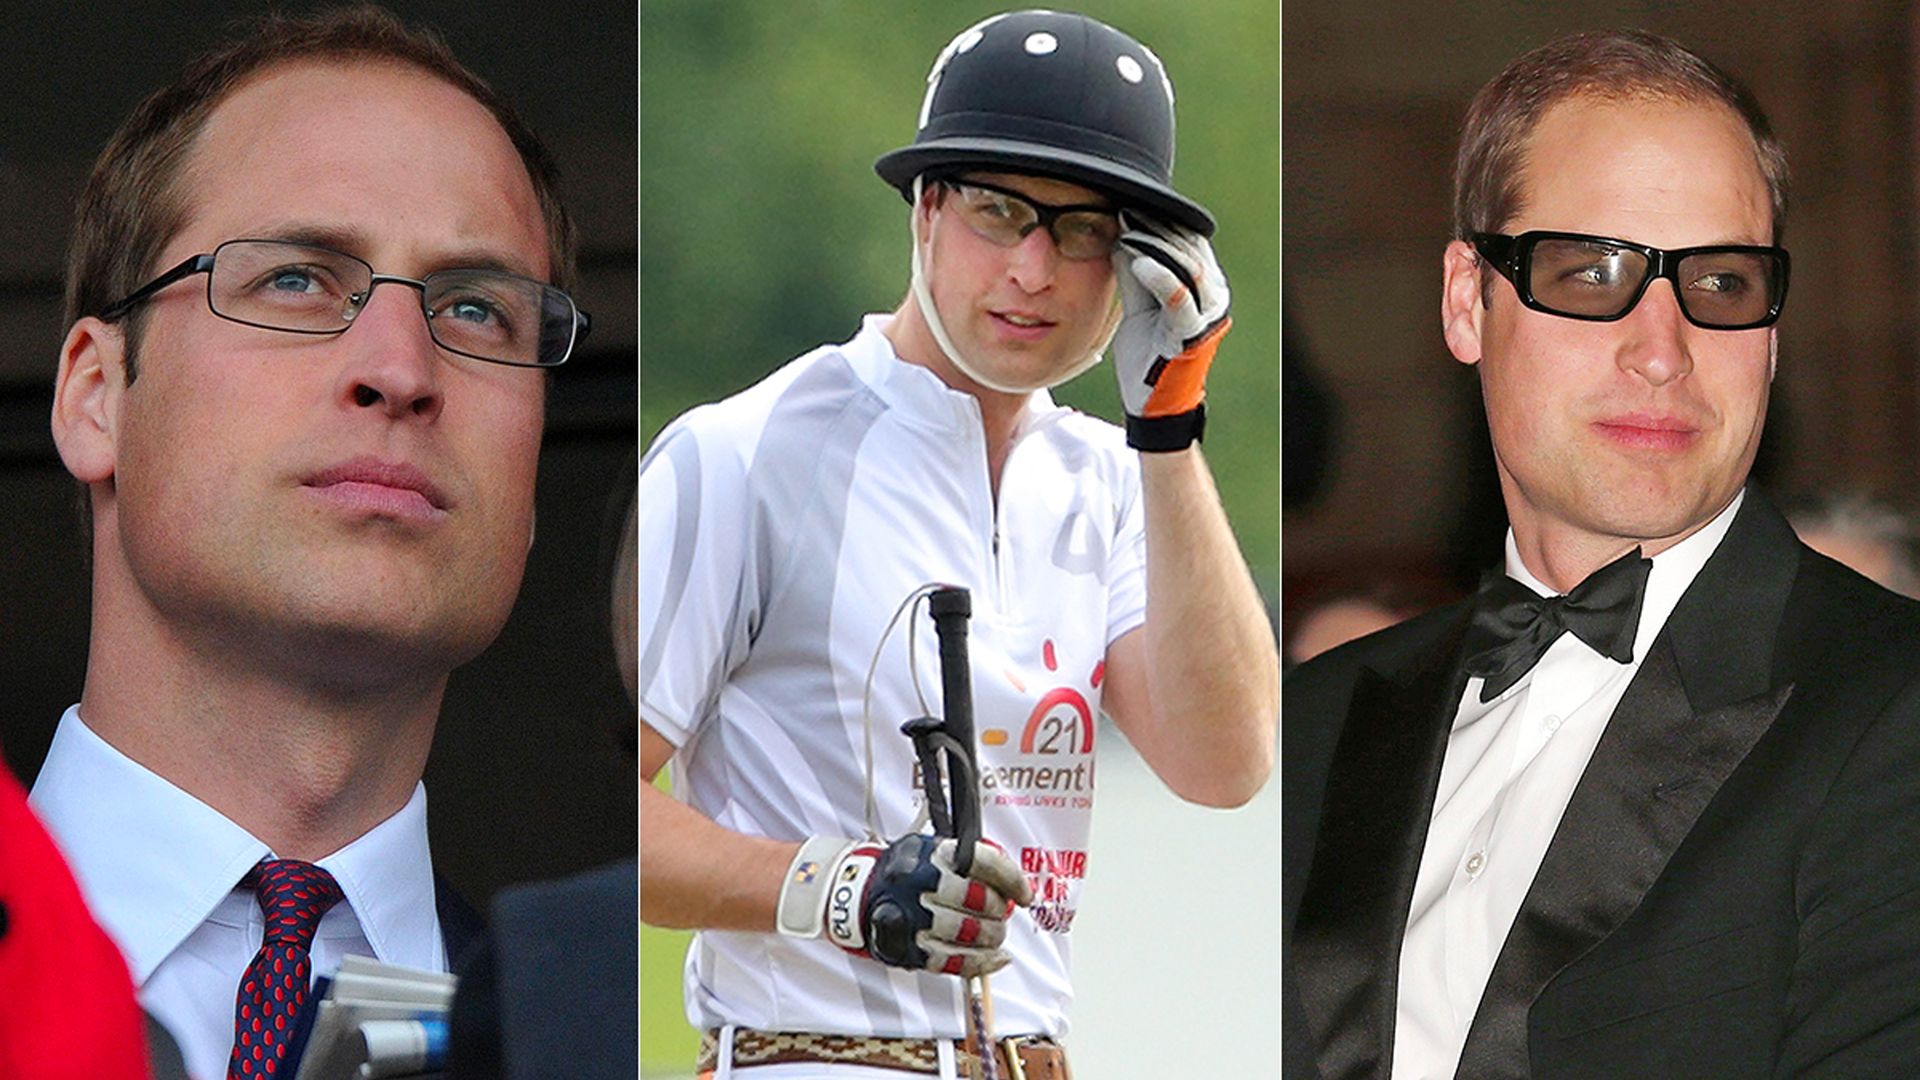 Prince William wearing glasses